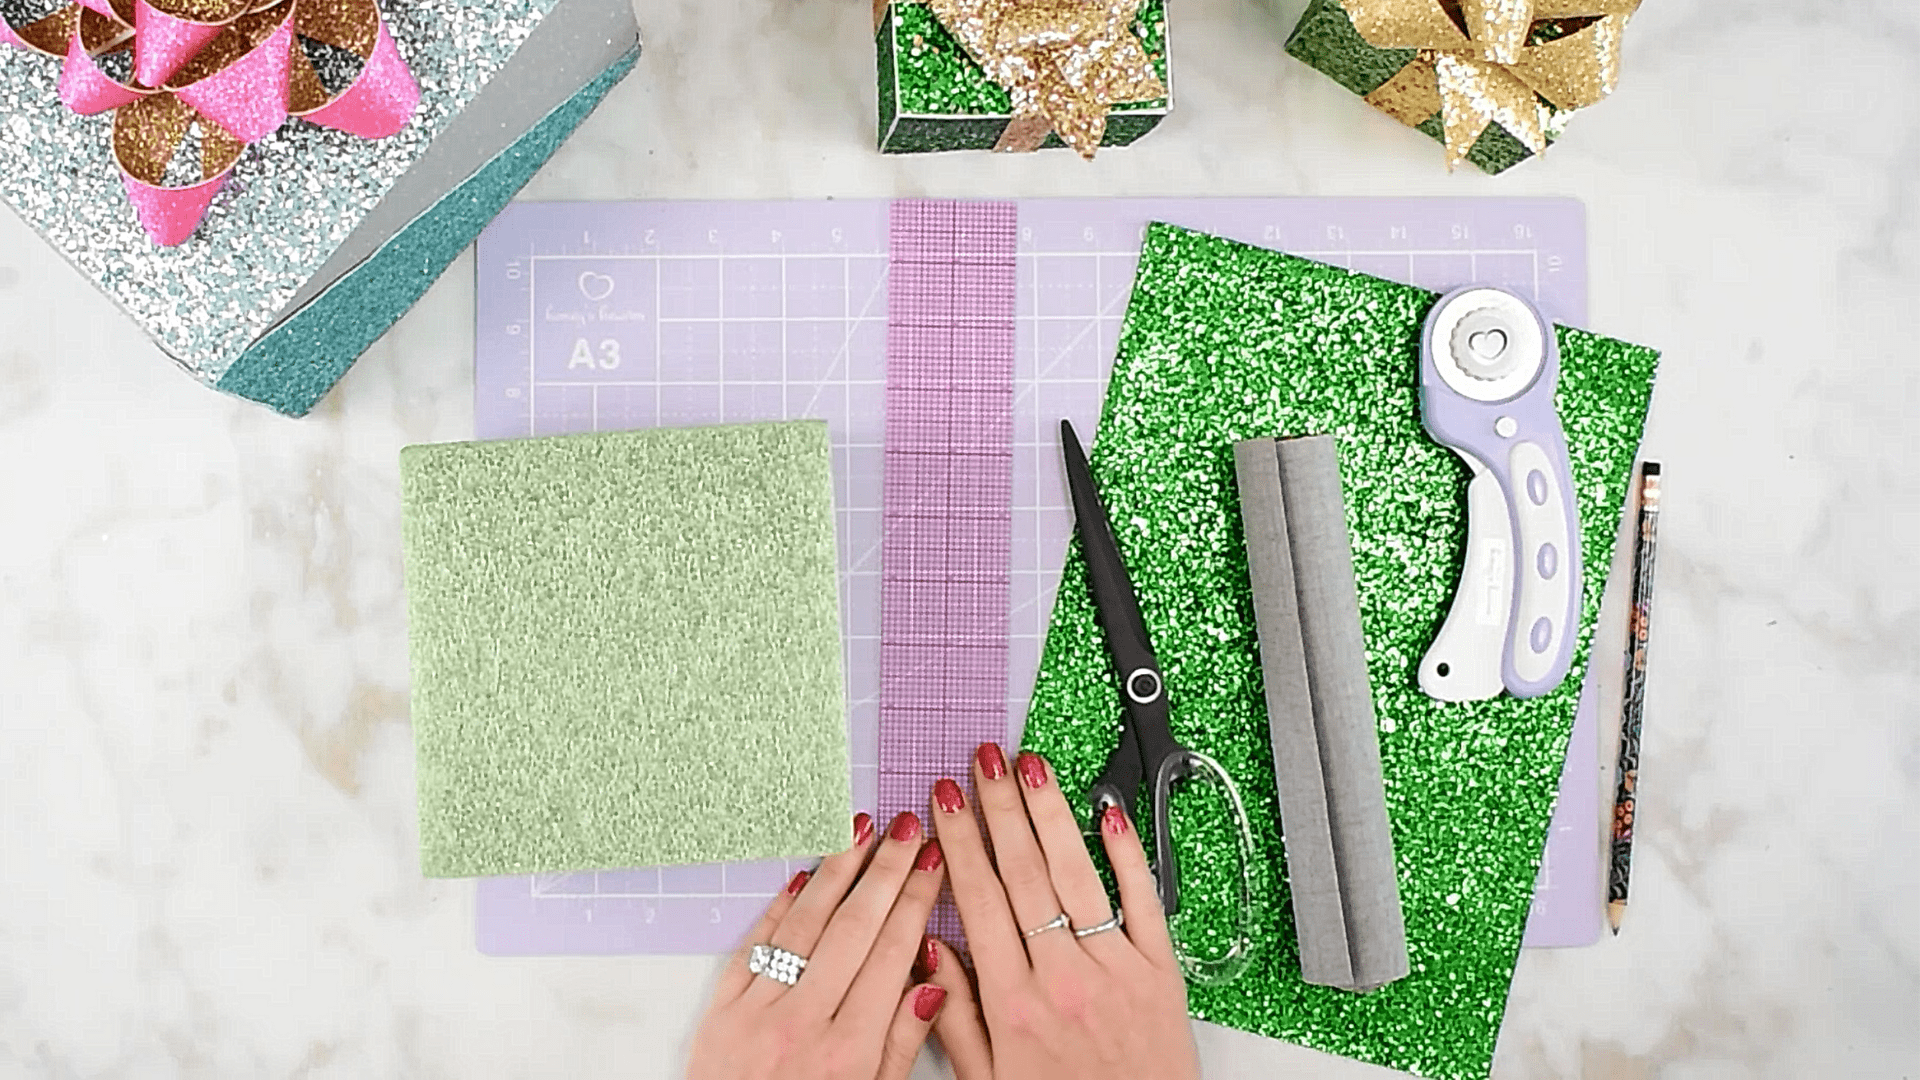 Crafting supplies laid out on a marble table includes a cutting mat, sheets of faux glittery leather, and crafting tools.